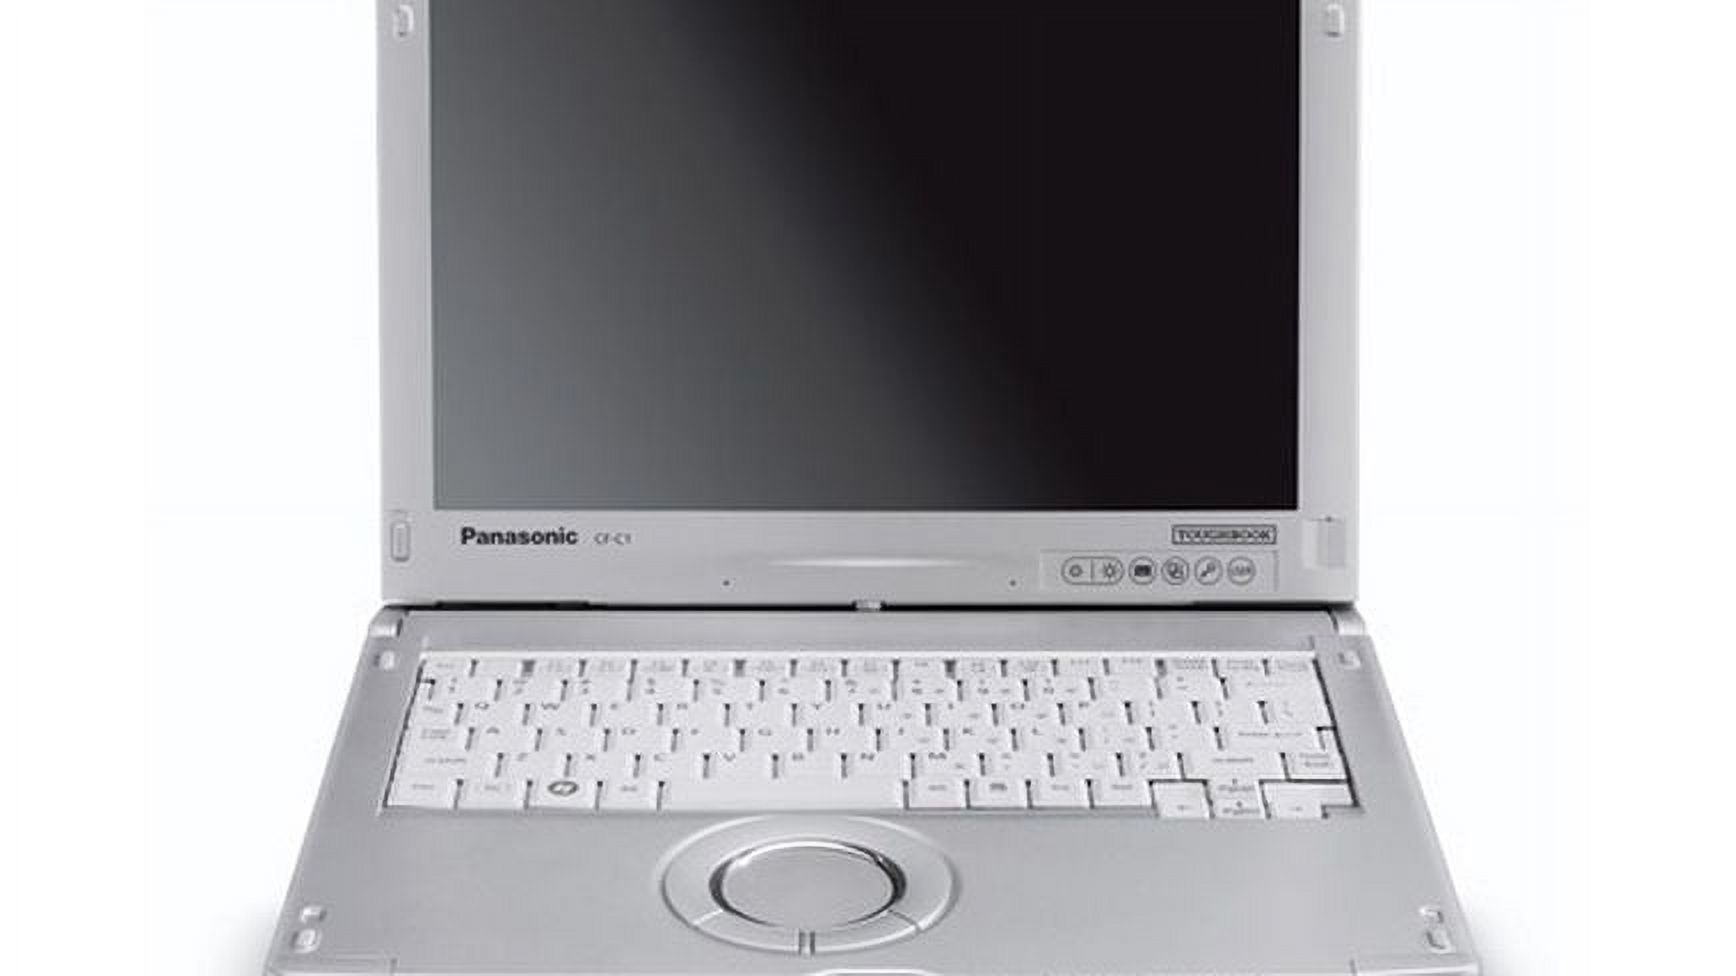 Panasonic Toughbook CF-C1 Intel Core i5 / 2.5MHZ / 6GB RAM / 320GB HDD / Windows 7 Pro - USED.- USED with FREE 3 Year Warranty provided by CPS. - image 2 of 2